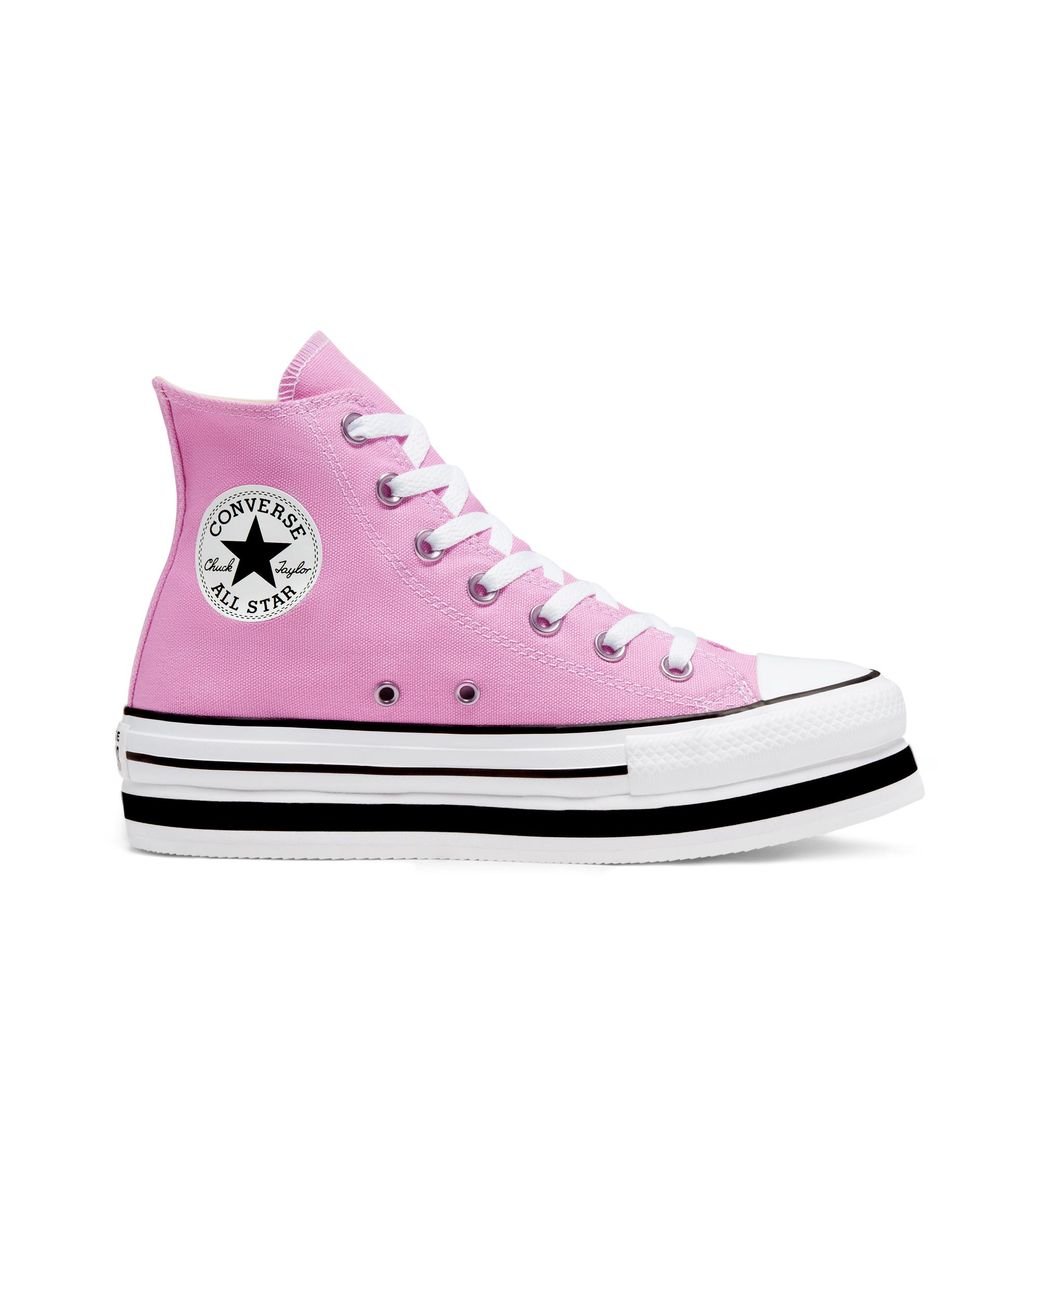 Converse Everyday Platform Chuck Taylor All Star in Pink | Lyst